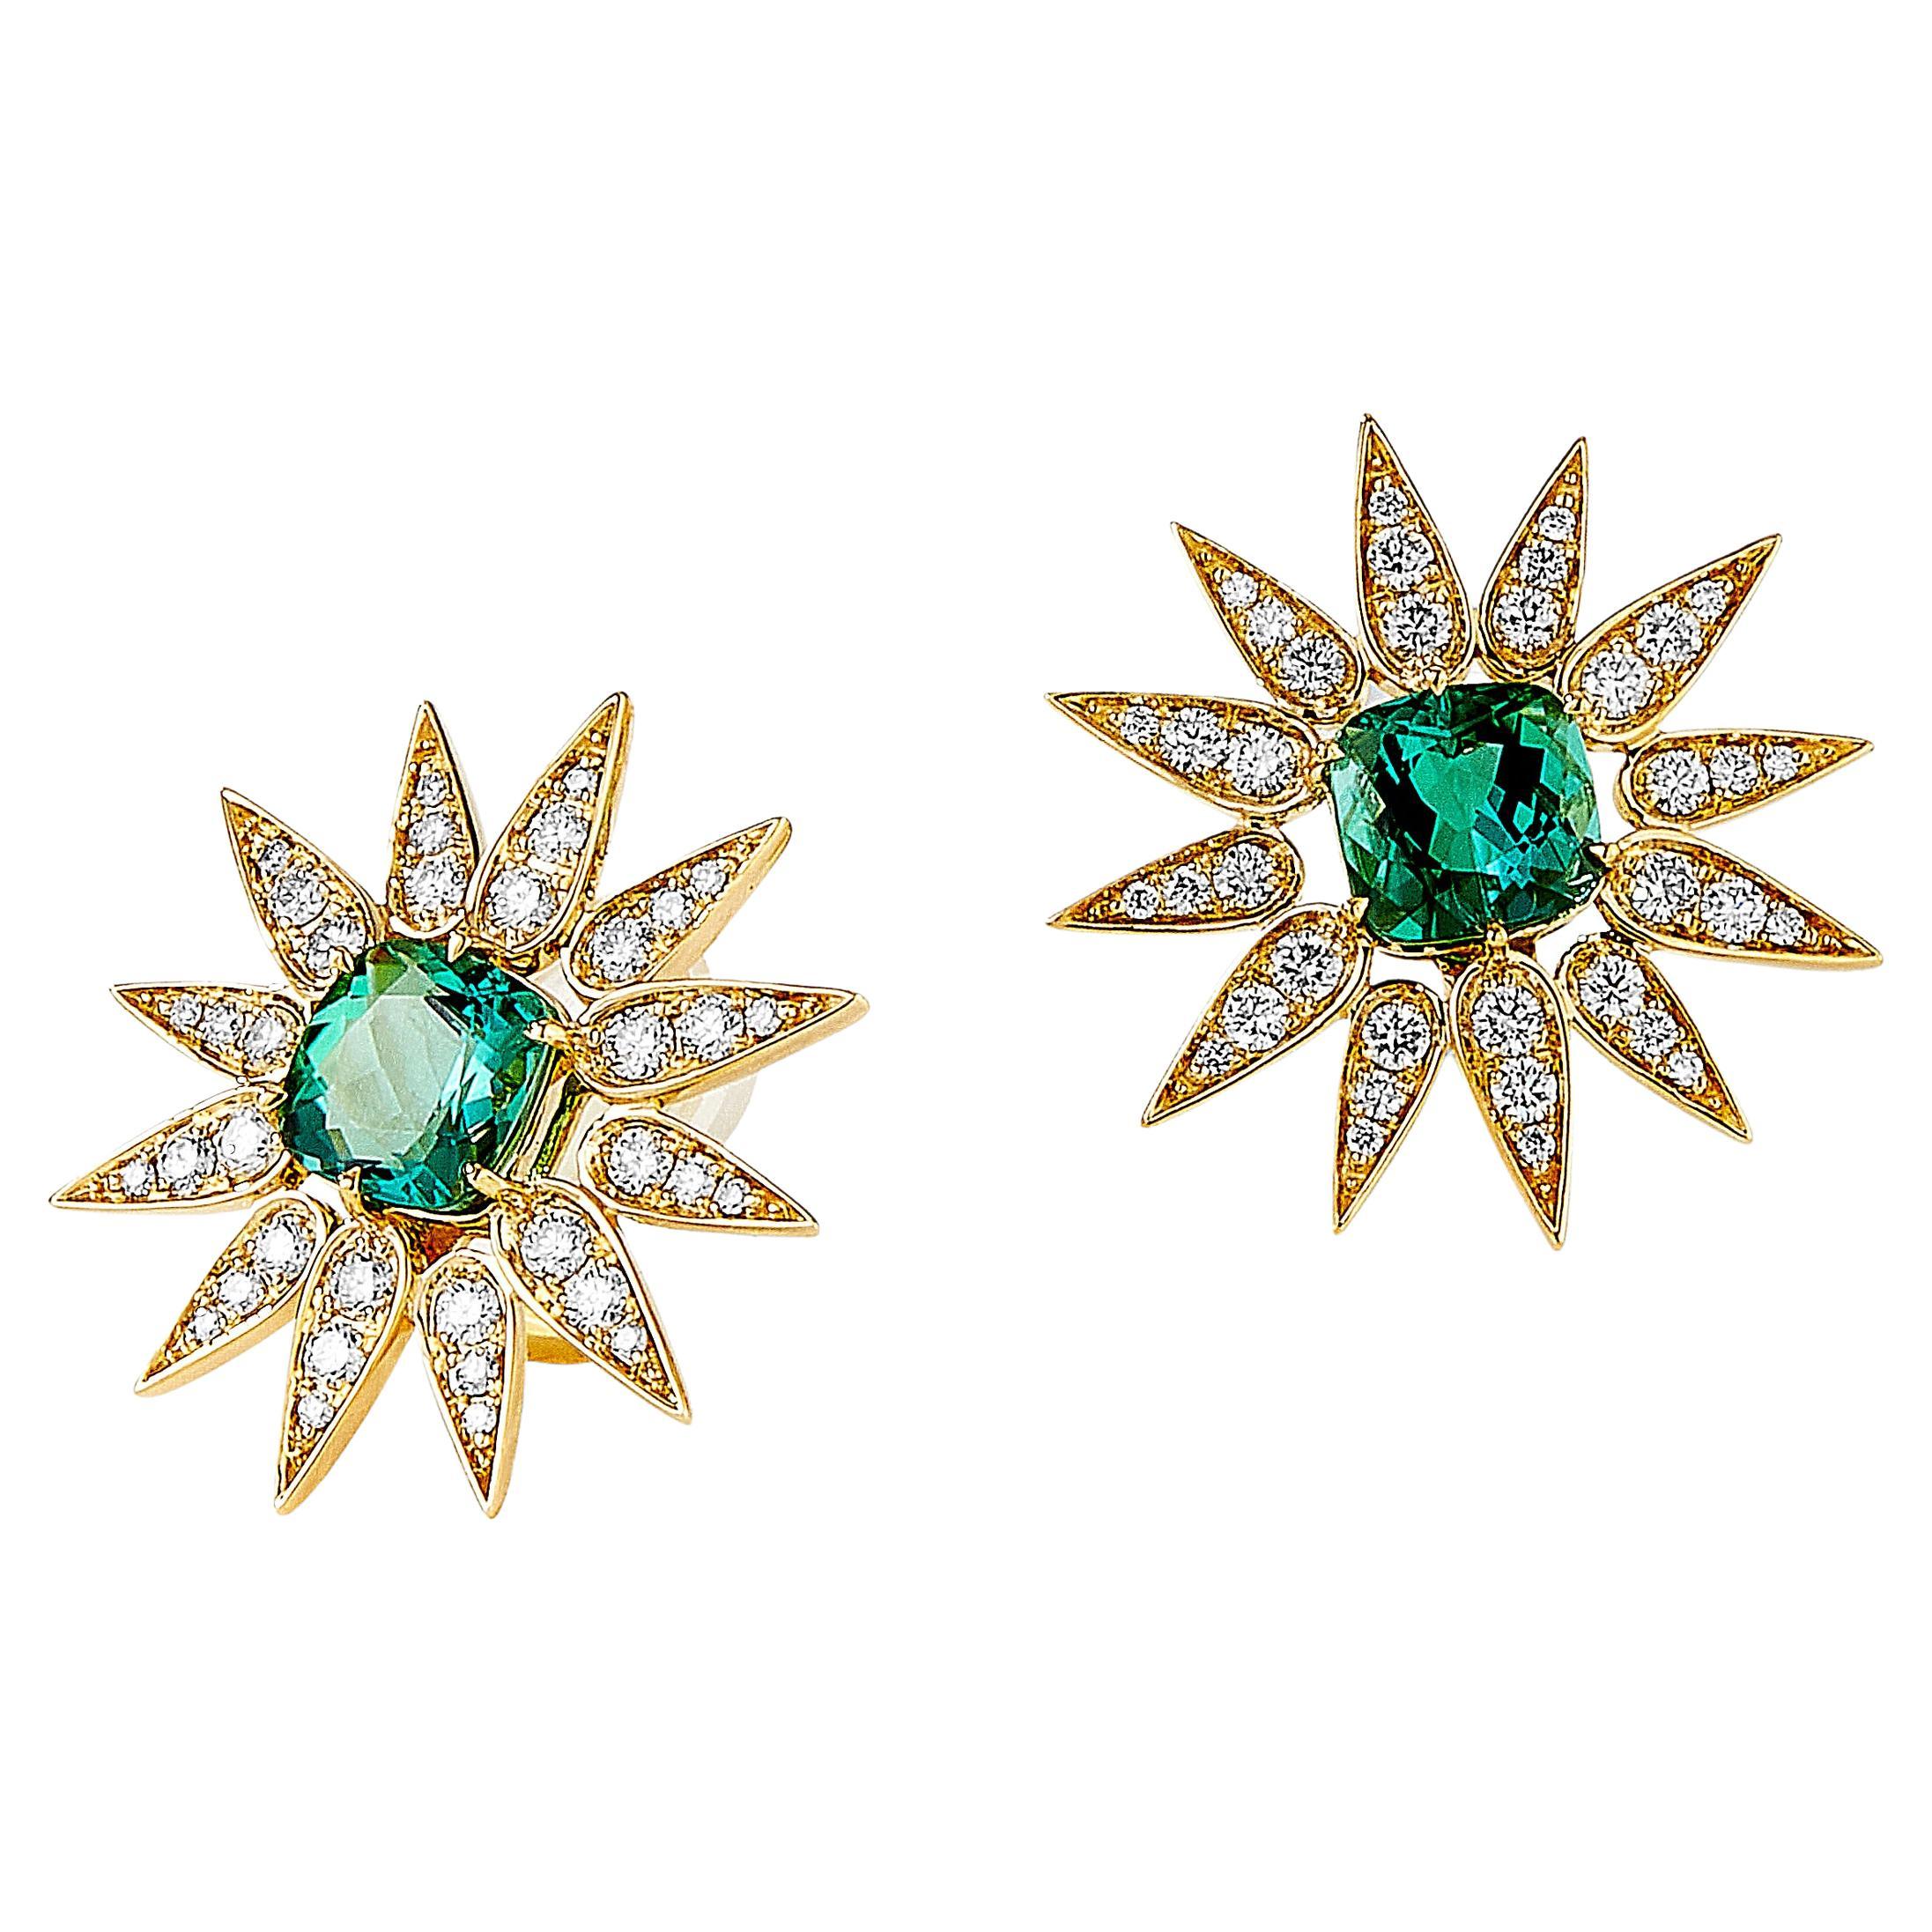 Syna Sunburst Earrings with Green Tourmaline and Champagne Diamonds